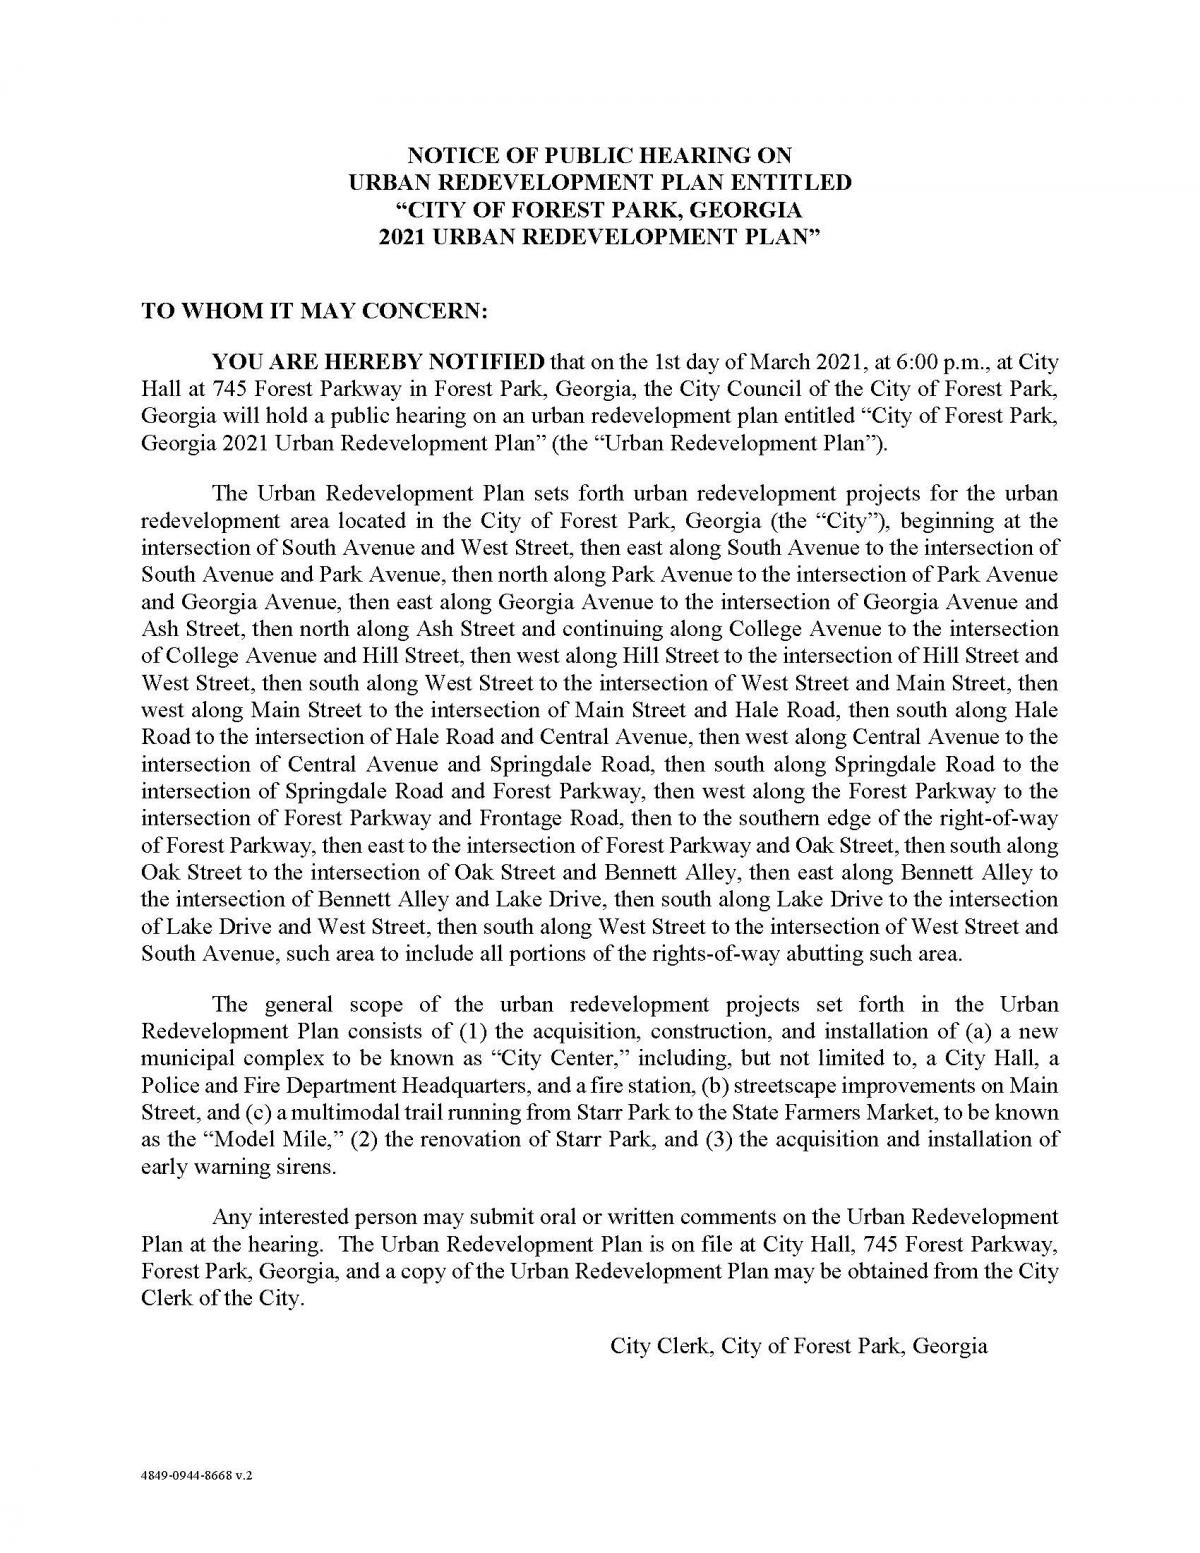 NOTICE OF PUBLIC HEARING ON URBAN REDEVELOPMENT PLAN ENTITLED  “CITY OF FOREST PARK, GEORGIA  2021 URBAN REDEVELOPMENT PLAN” 